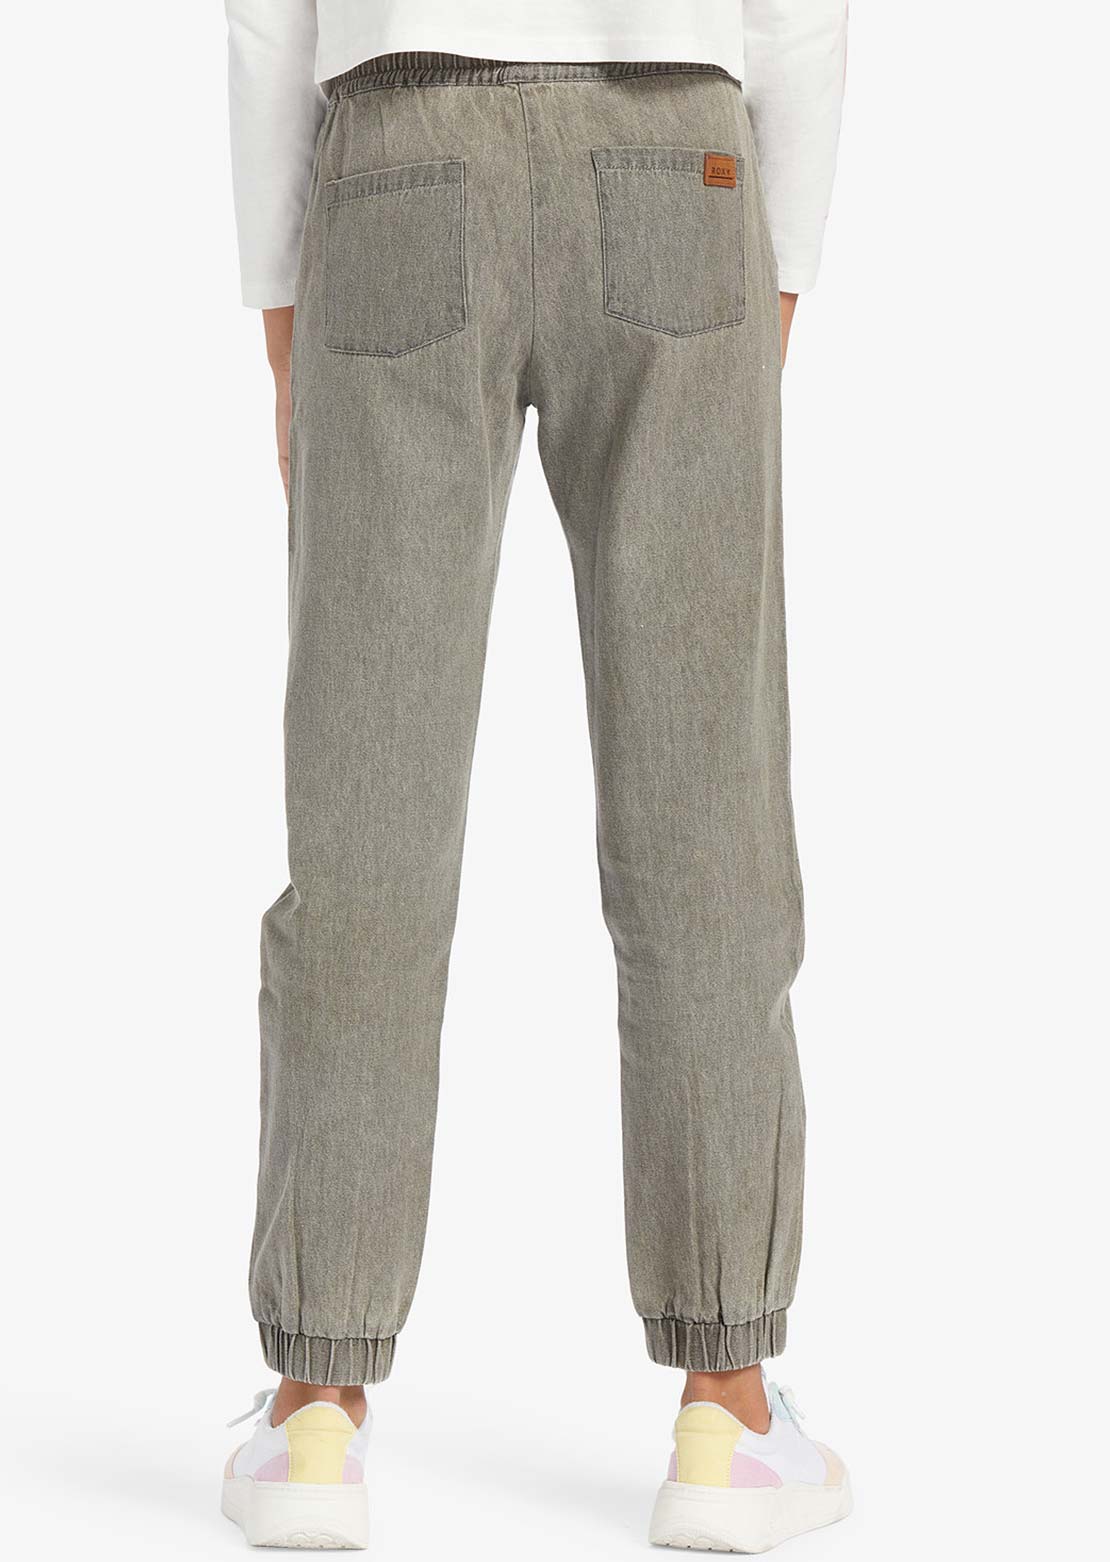 Roxy Junior End Of The Day Pants Light Grey